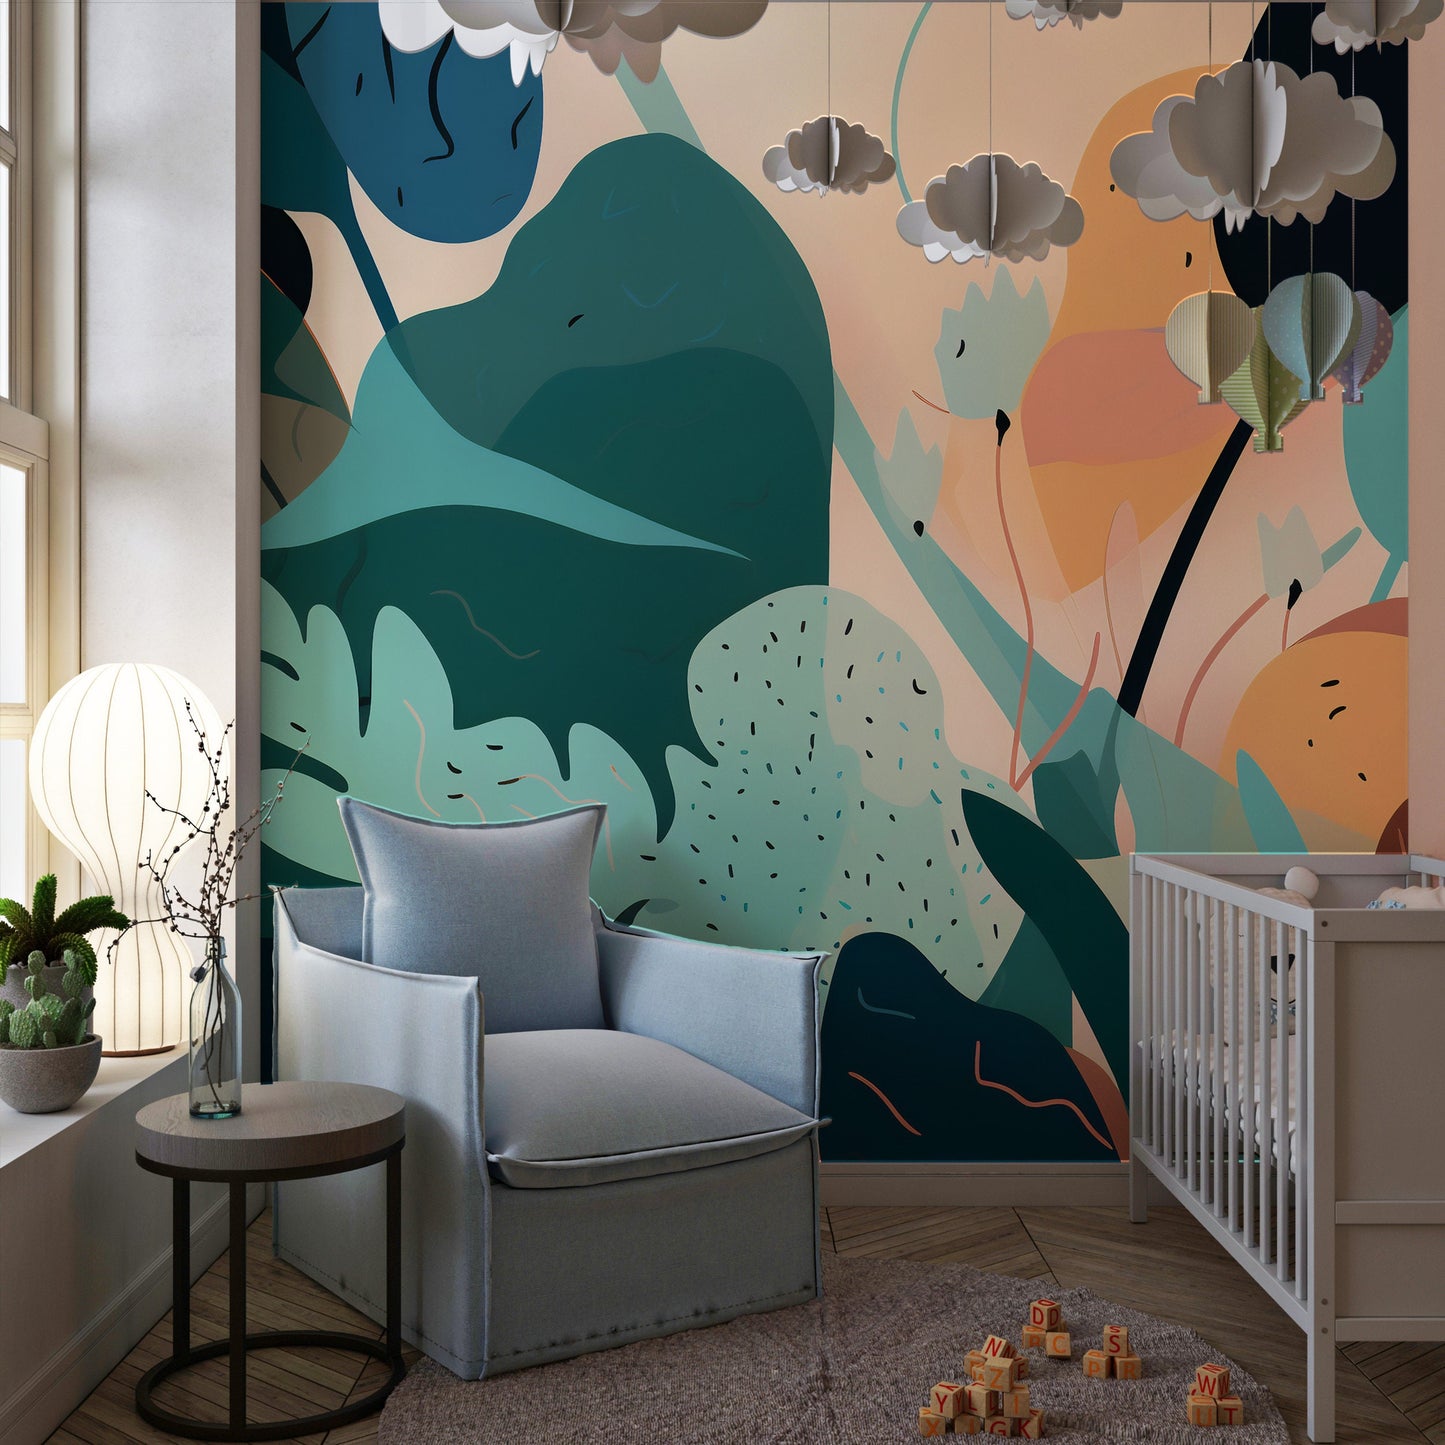 Abstract Wallpaper Mural with Delicate Matisse-Inspired Shapes. Easy-to-Apply Peel and Stick.